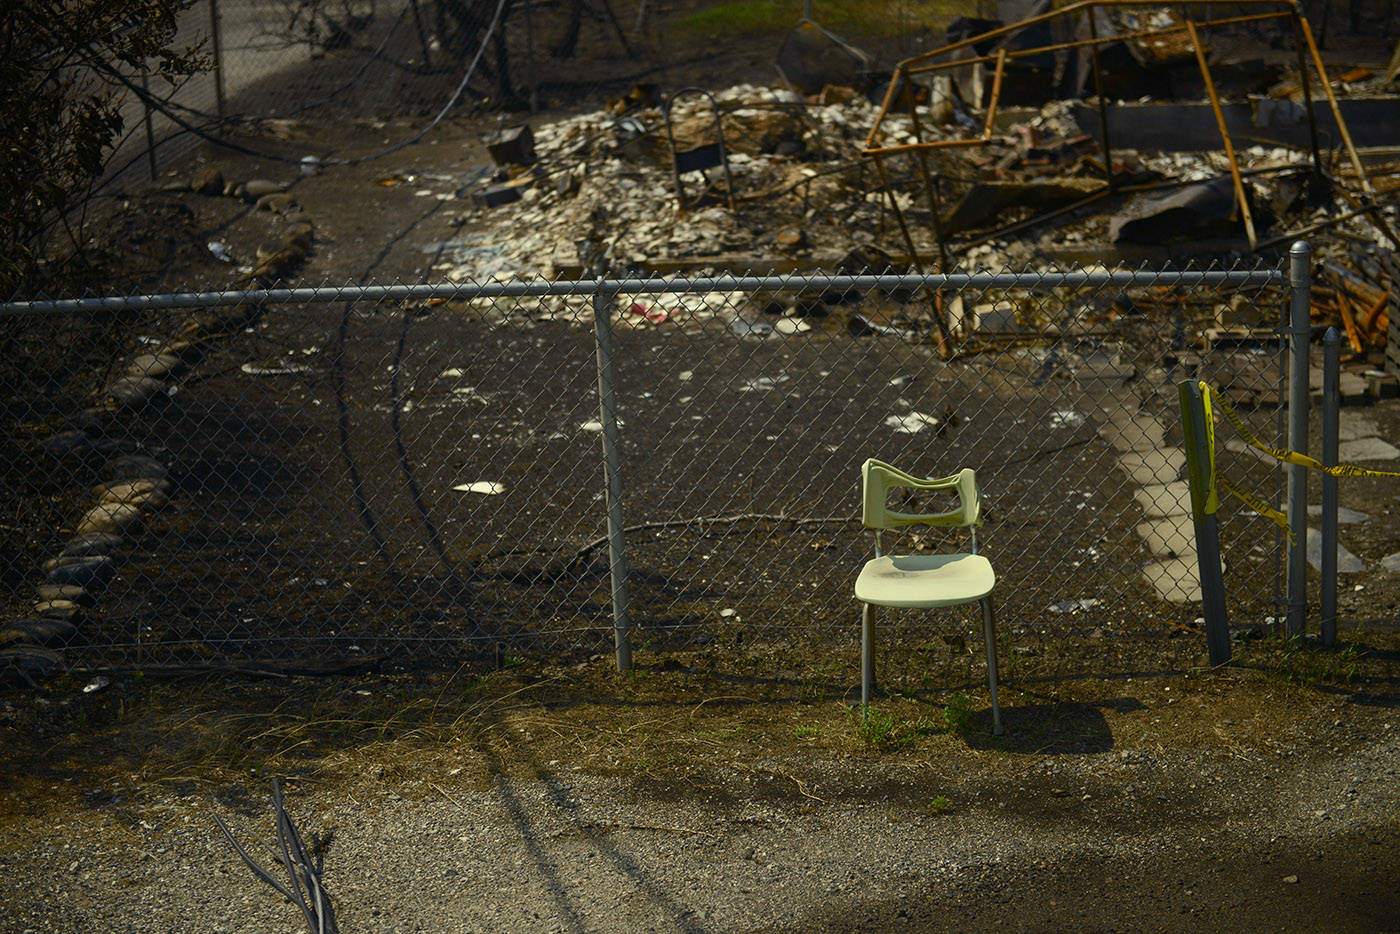 A partially melted chair stands amid the burnt rubble on Main Street in the Village of Lytton, B.C. on Friday, July 9, 2021 following a massive wildfire that tore through the town destroying 90 per cent of it. (Jenna Hauck/ Black Press Media)